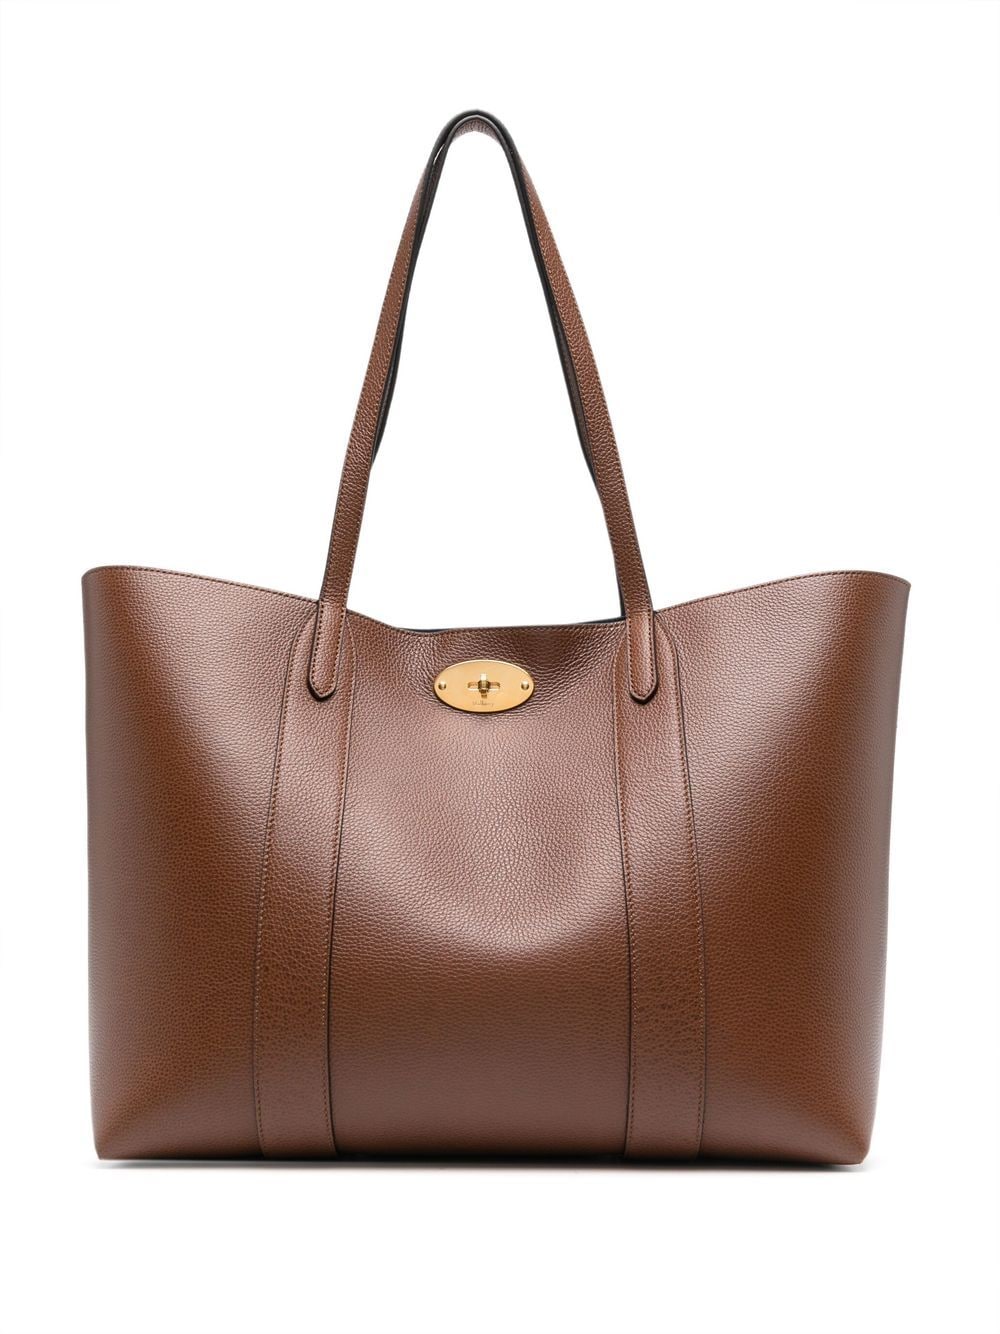 Mulberry leather tote bag - Brown von Mulberry